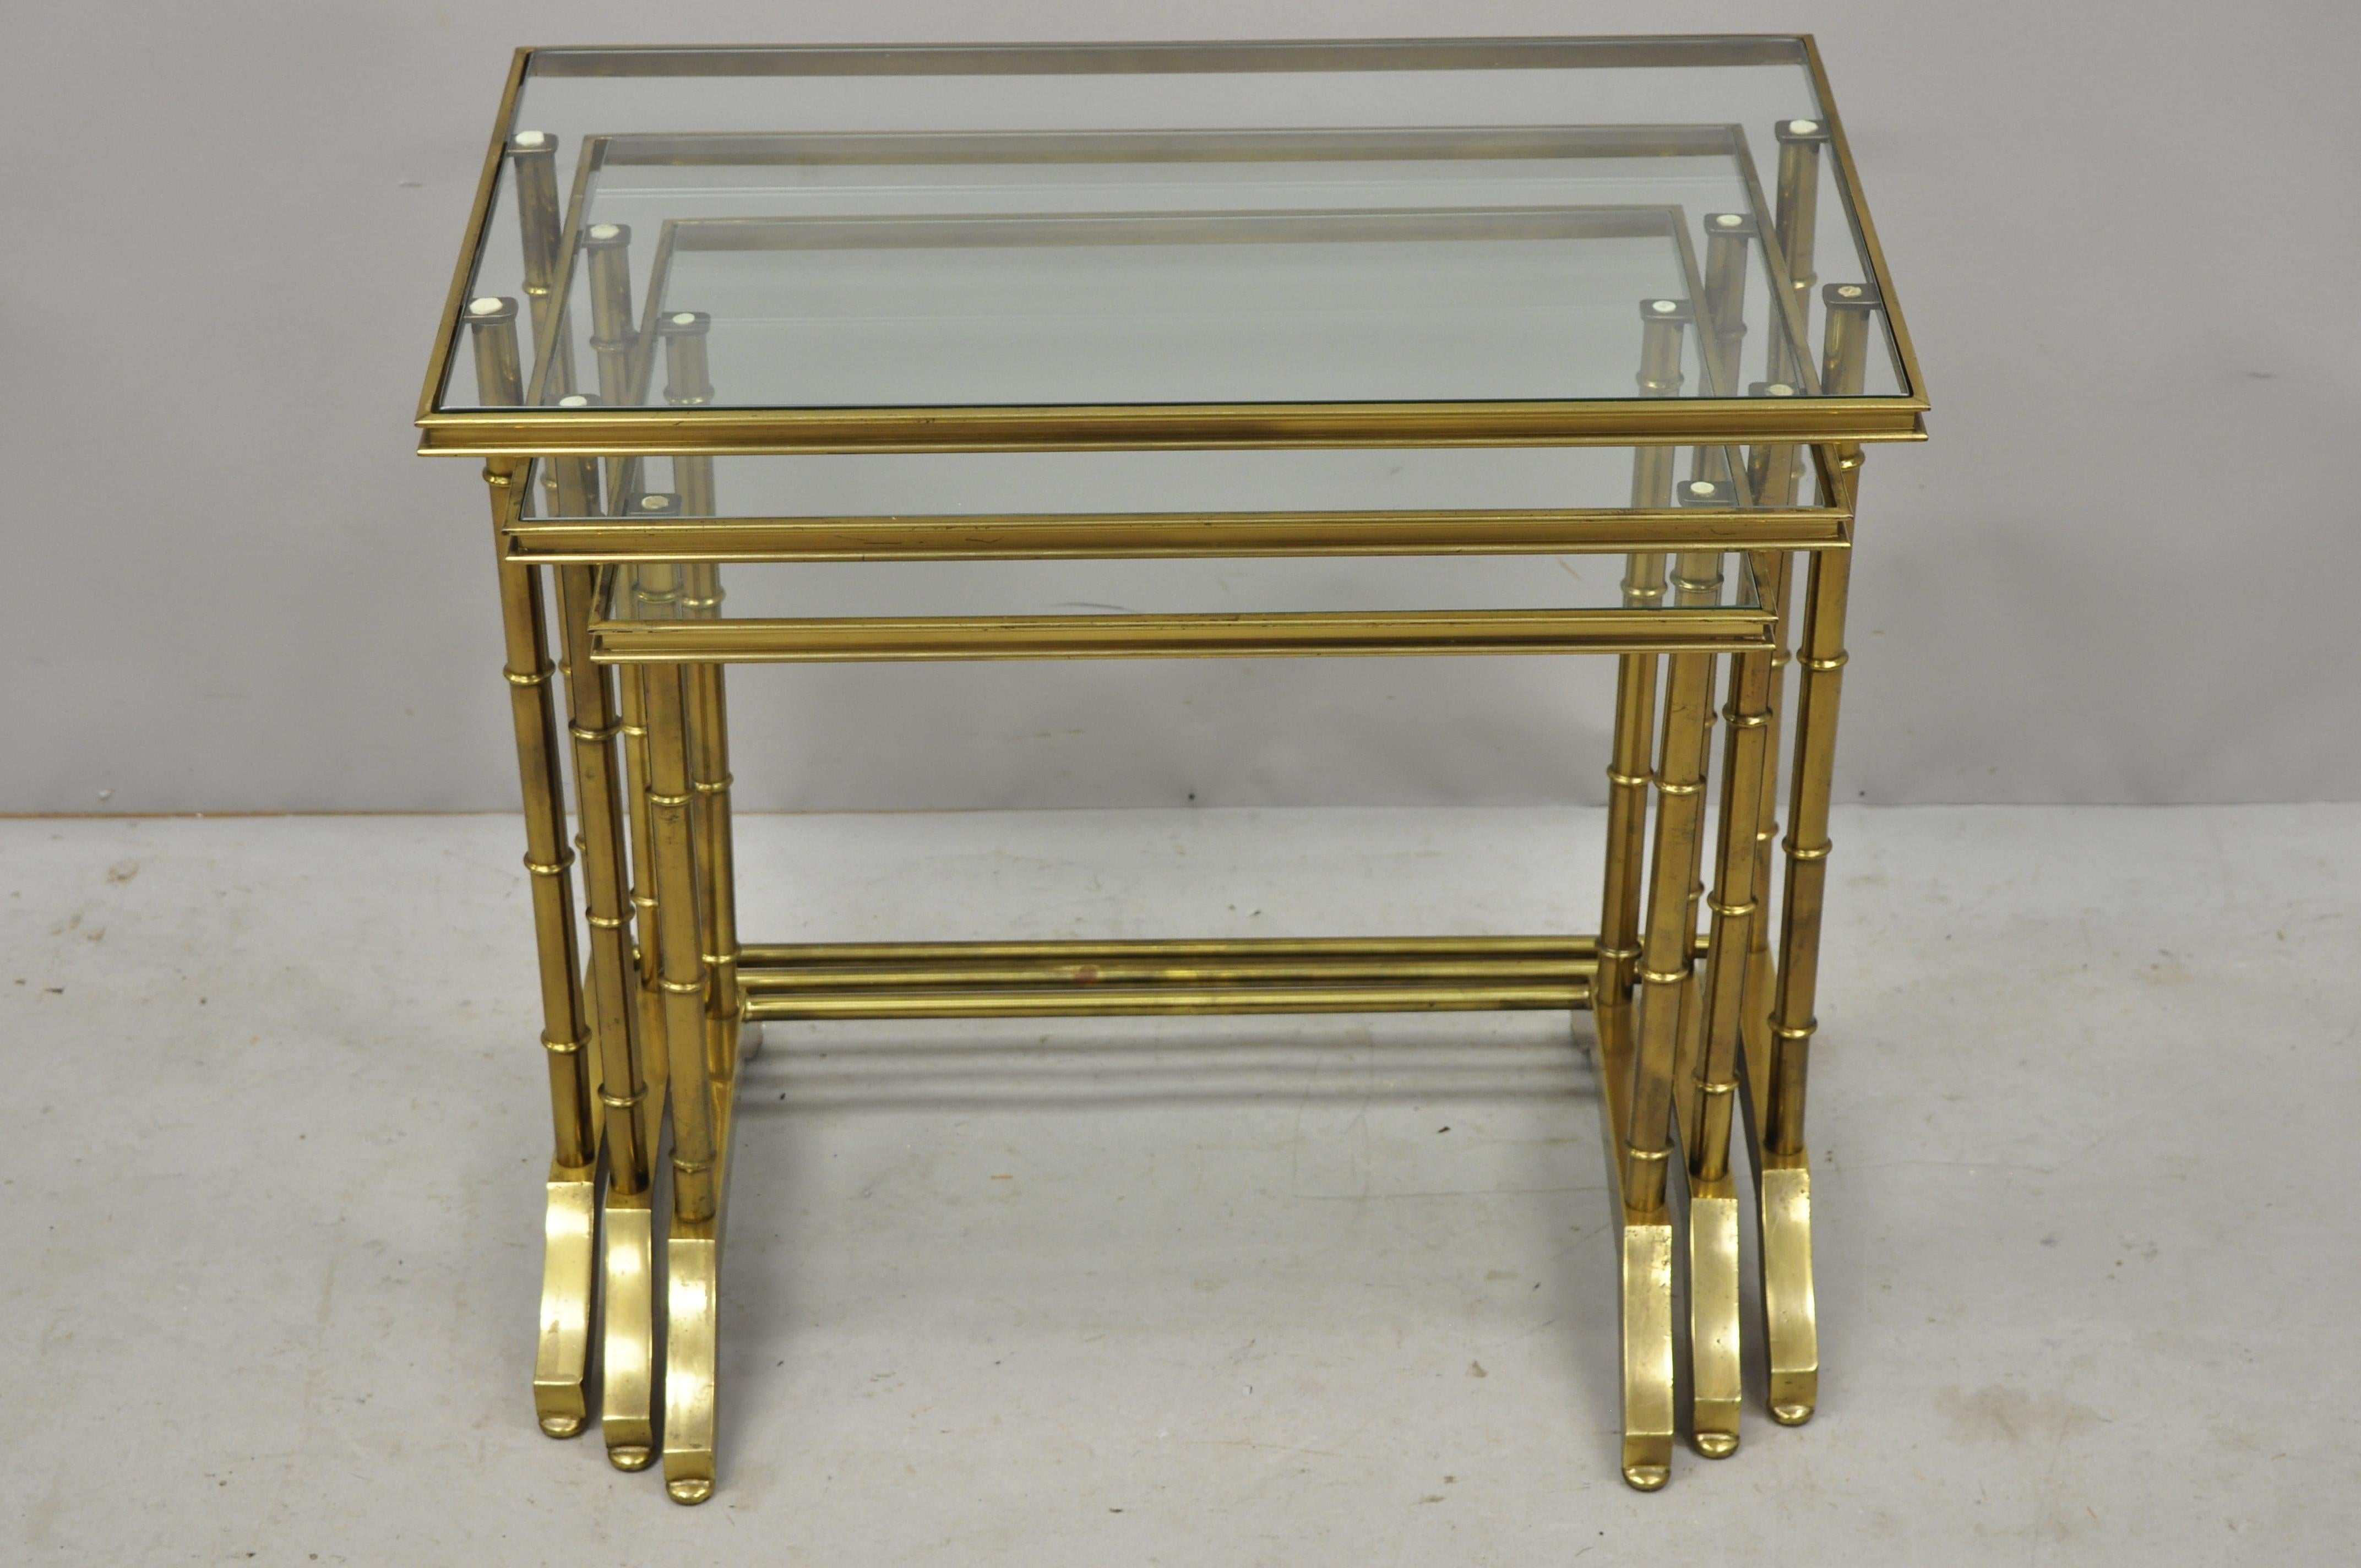 3 brass faux bamboo glass top nesting side tables attributed to Mastercraft. Listing features a faux bamboo design, glass tops, nesting form, brass construction, quality craftsmanship, great style and form. Attributed to Mastercraft, circa mid-20th